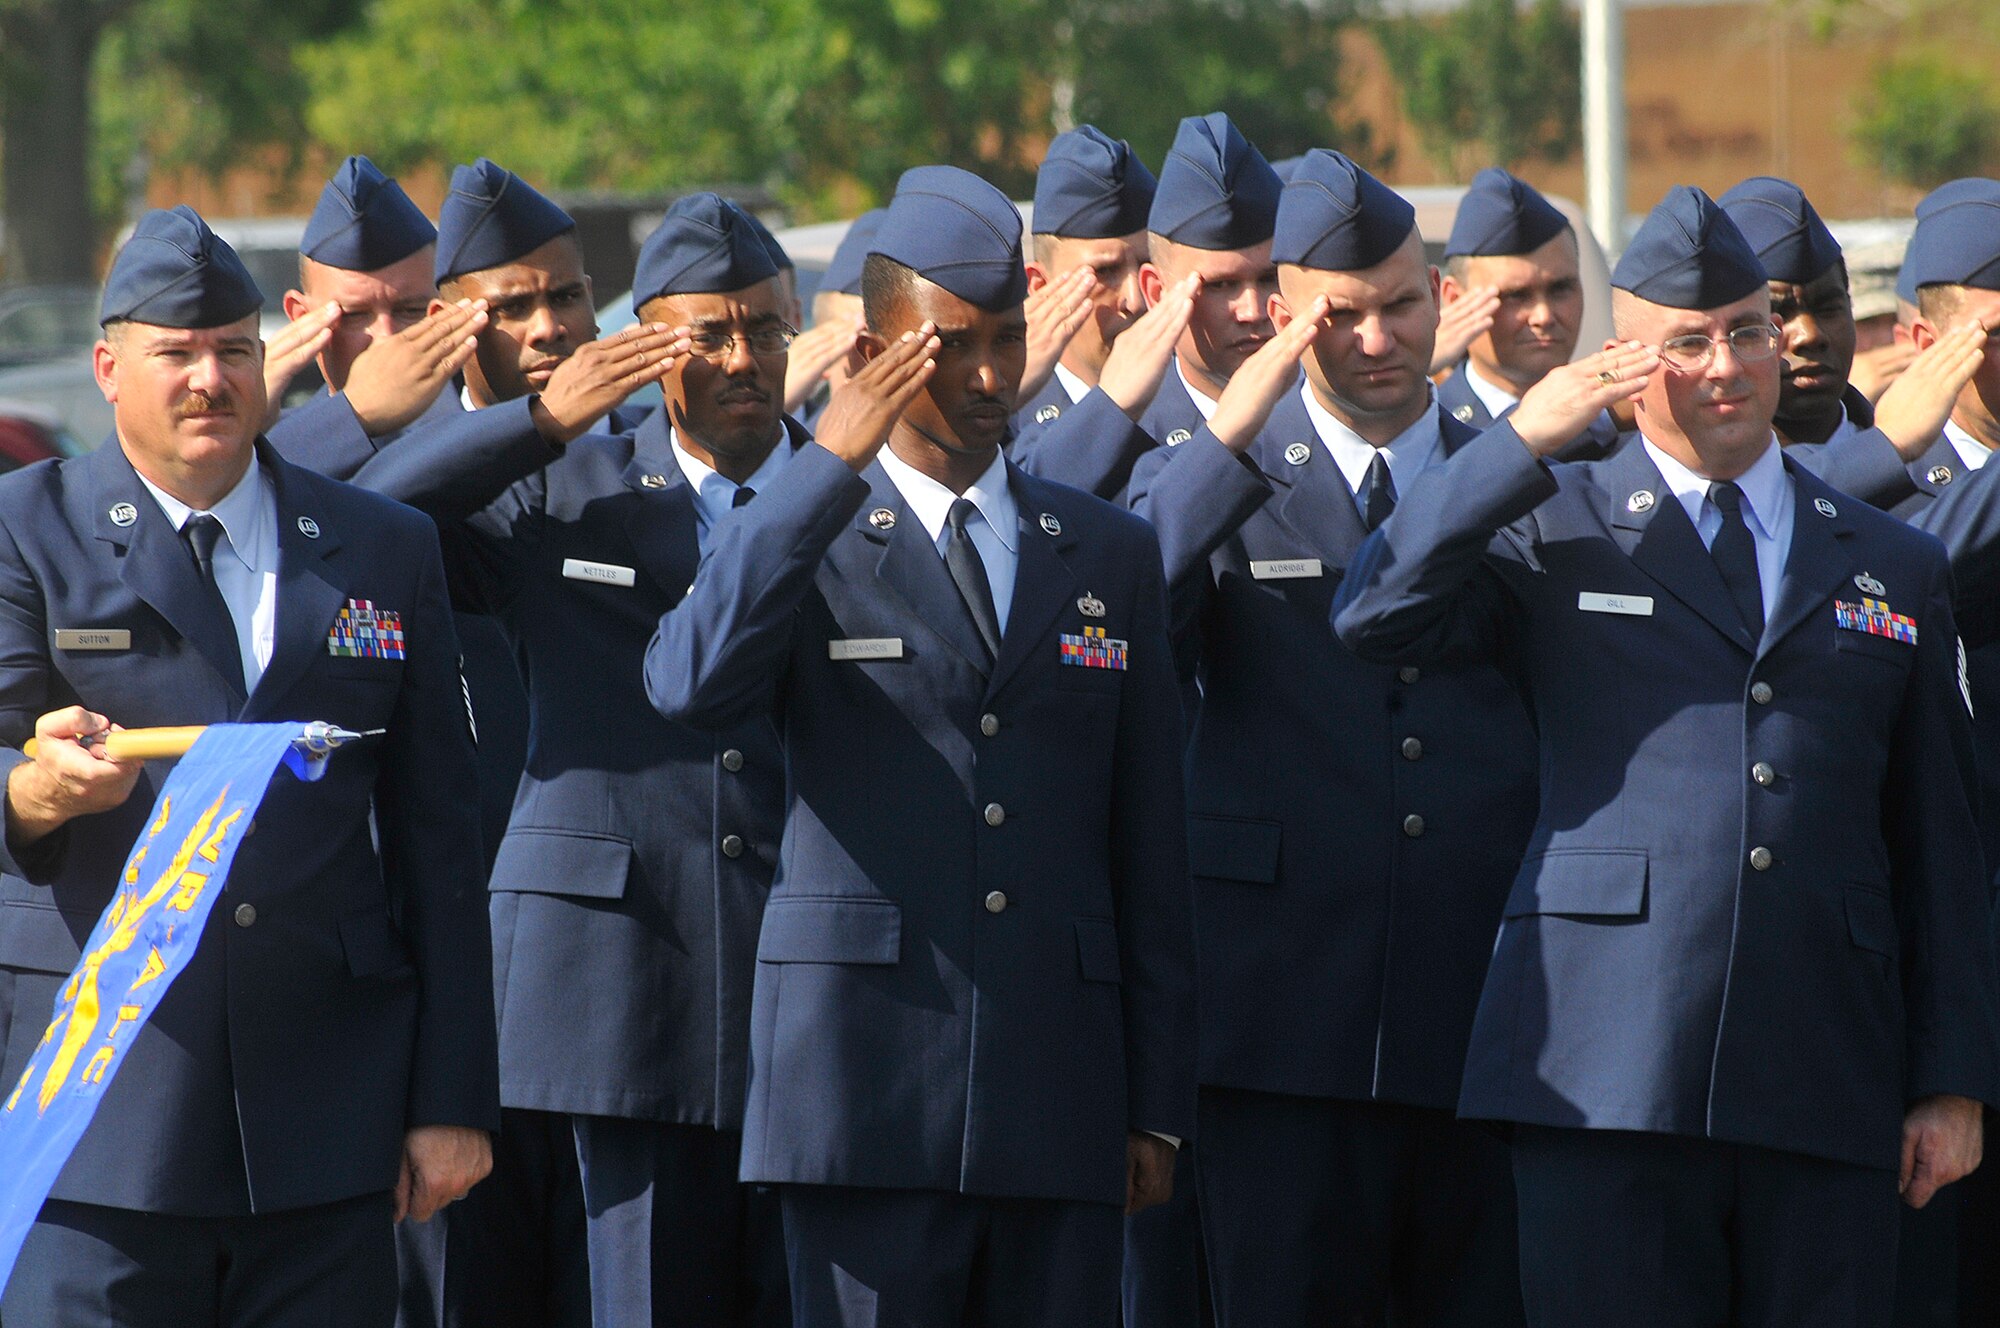 Warner Robins ALC Airmen salute during the lowering of the flag in a Memorial Day Retreat Ceremony Wed. The retreat included representatives of every organization on base. (U. S. Air Force photo by Sue Sapp)